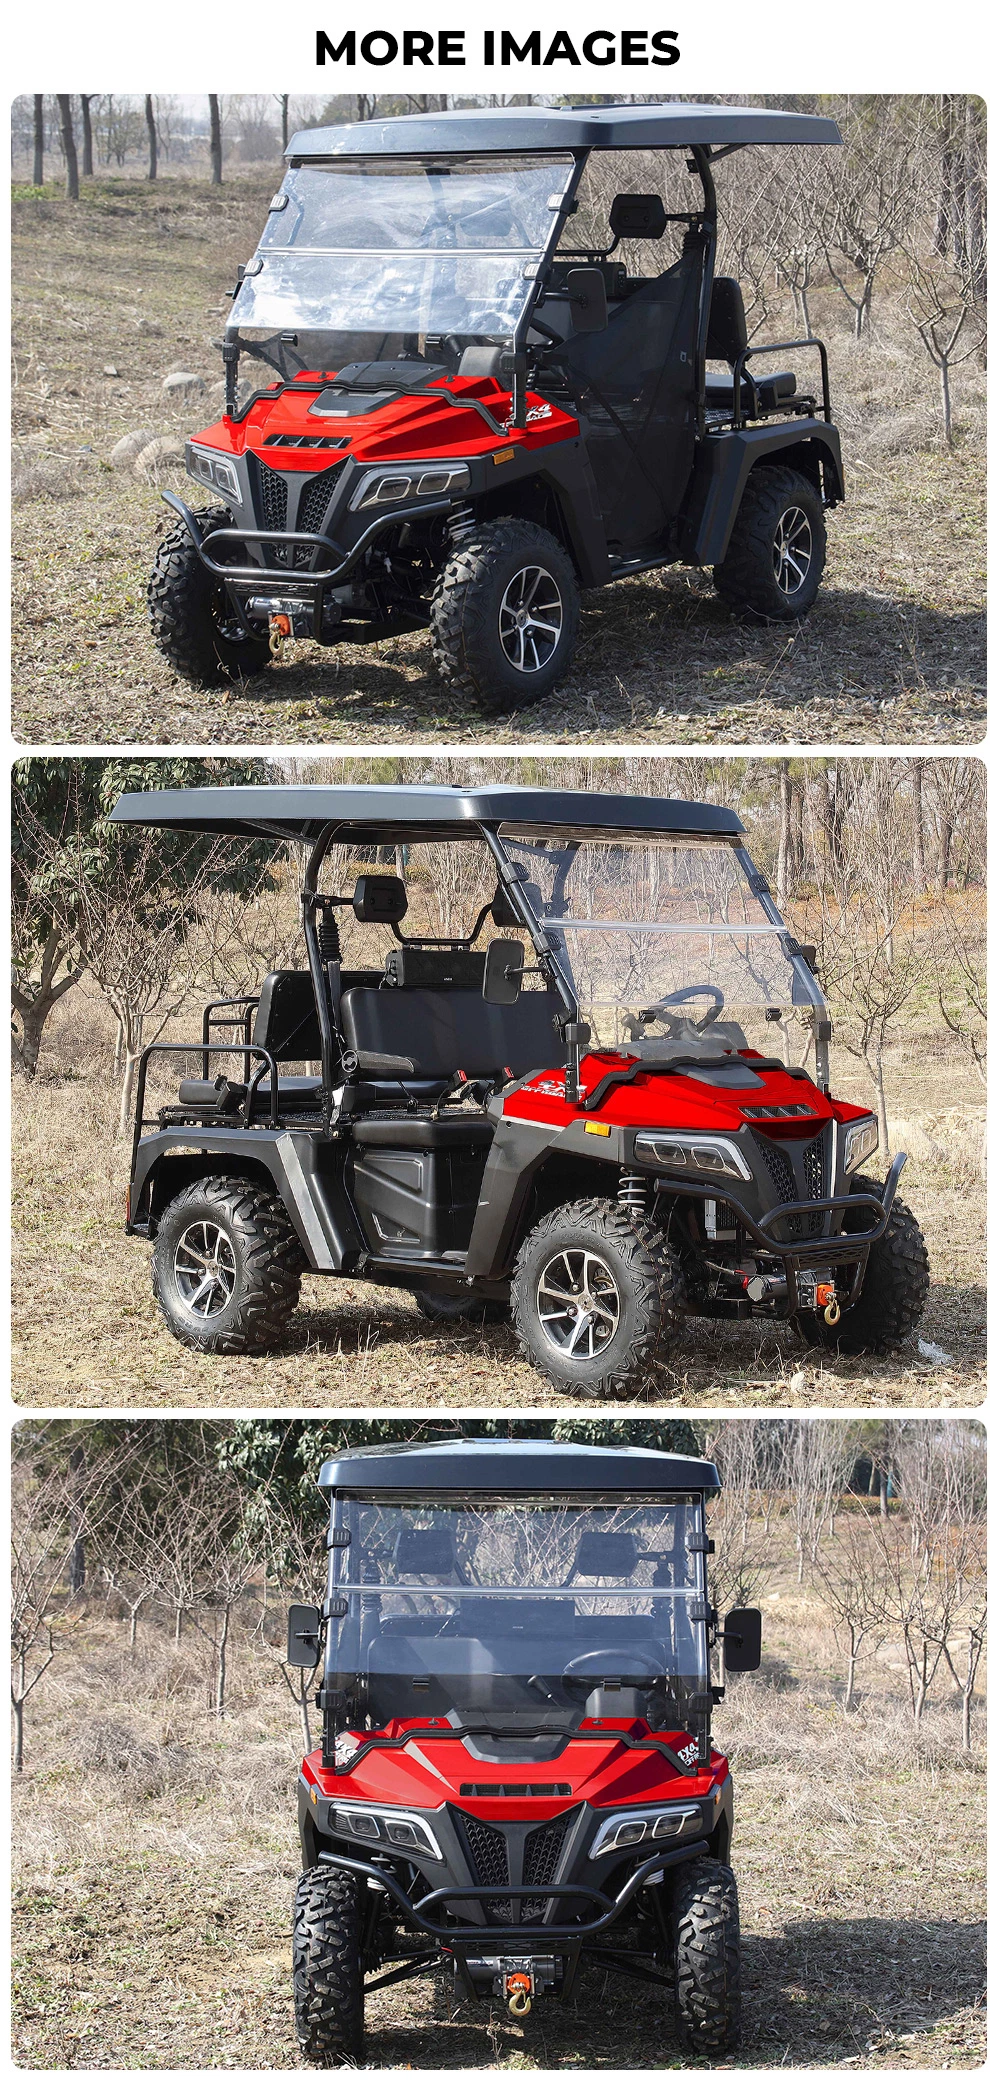 2024 Off Road Gasoline Hunting Buggy 72V Lithium Battery 4 6 Seater 10KW Club Cart 4X4 Electric Golf Car